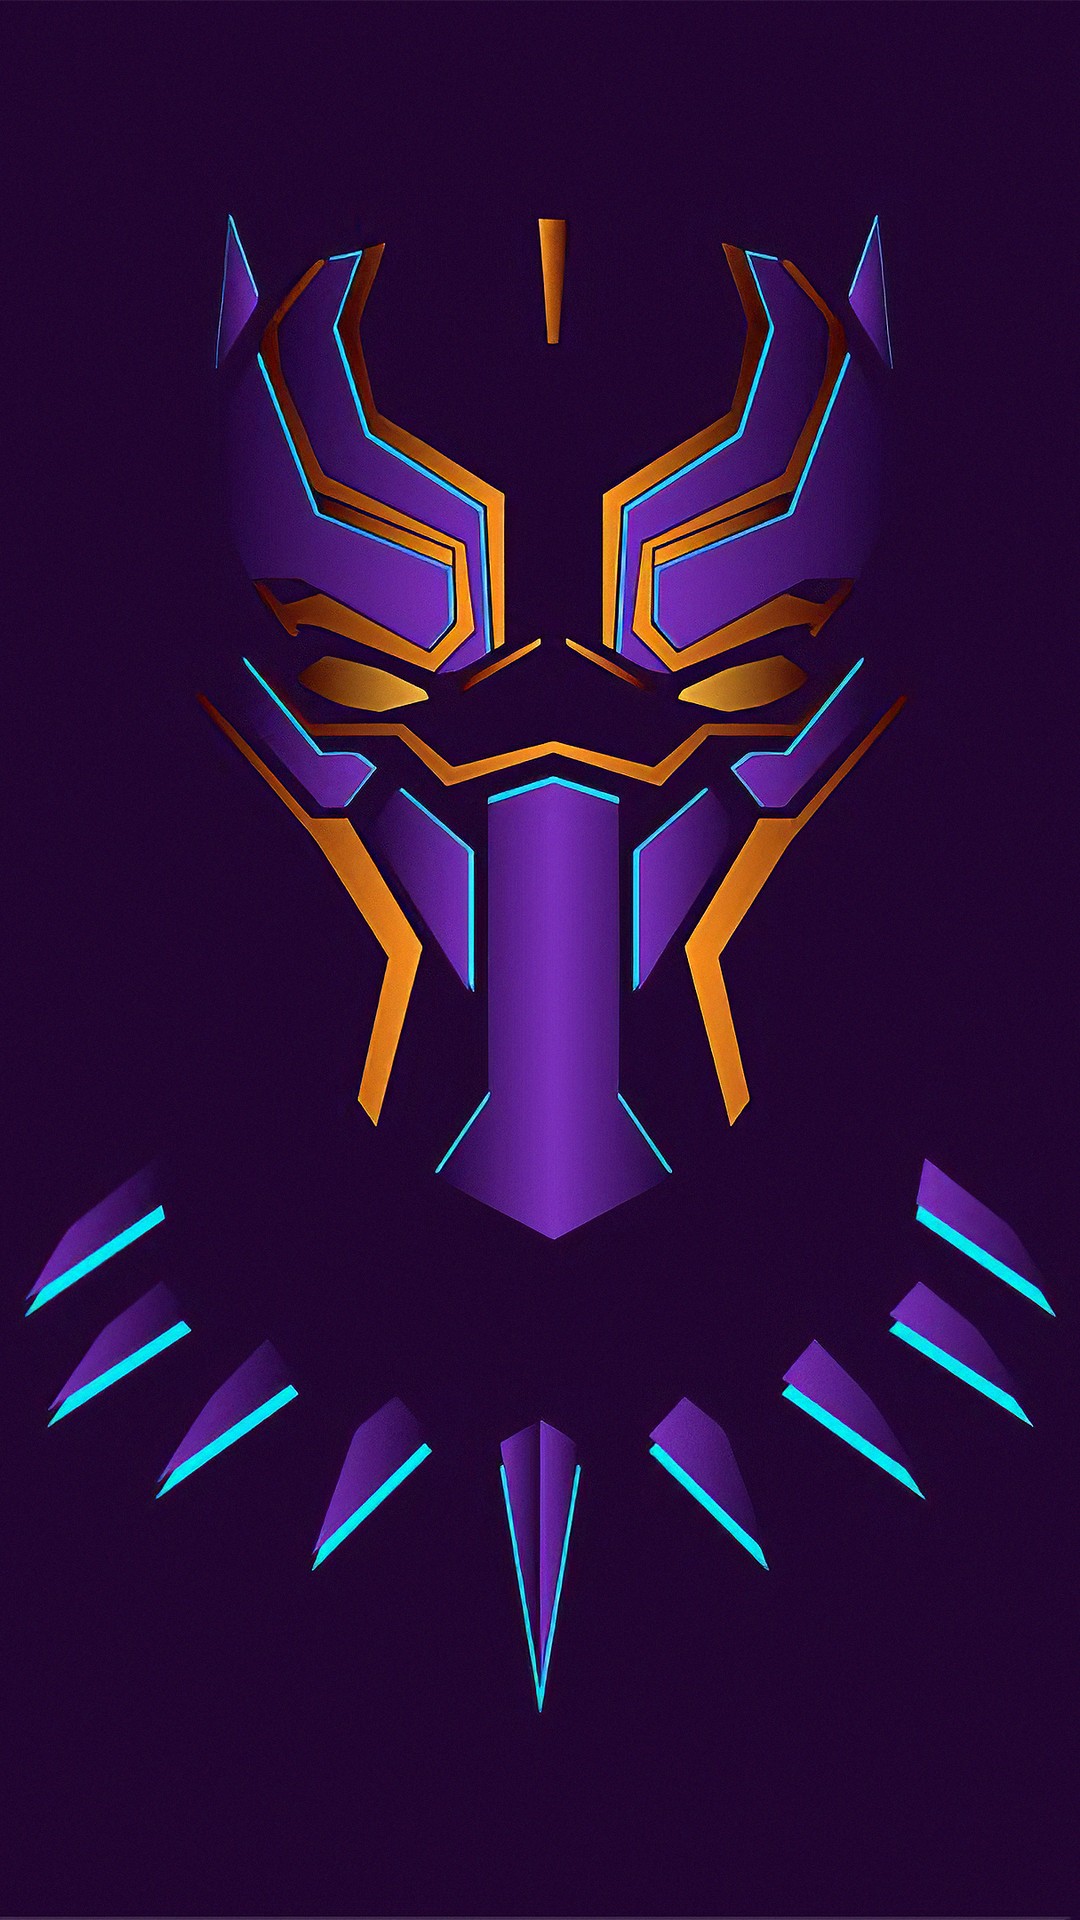 Black Panther iPhone Wallpaper Design With high-resolution 1080X1920 pixel. You can set as wallpaper for Apple iPhone X, XS Max, XR, 8, 7, 6, SE, iPad. Enjoy and share your favorite HD wallpapers and background images